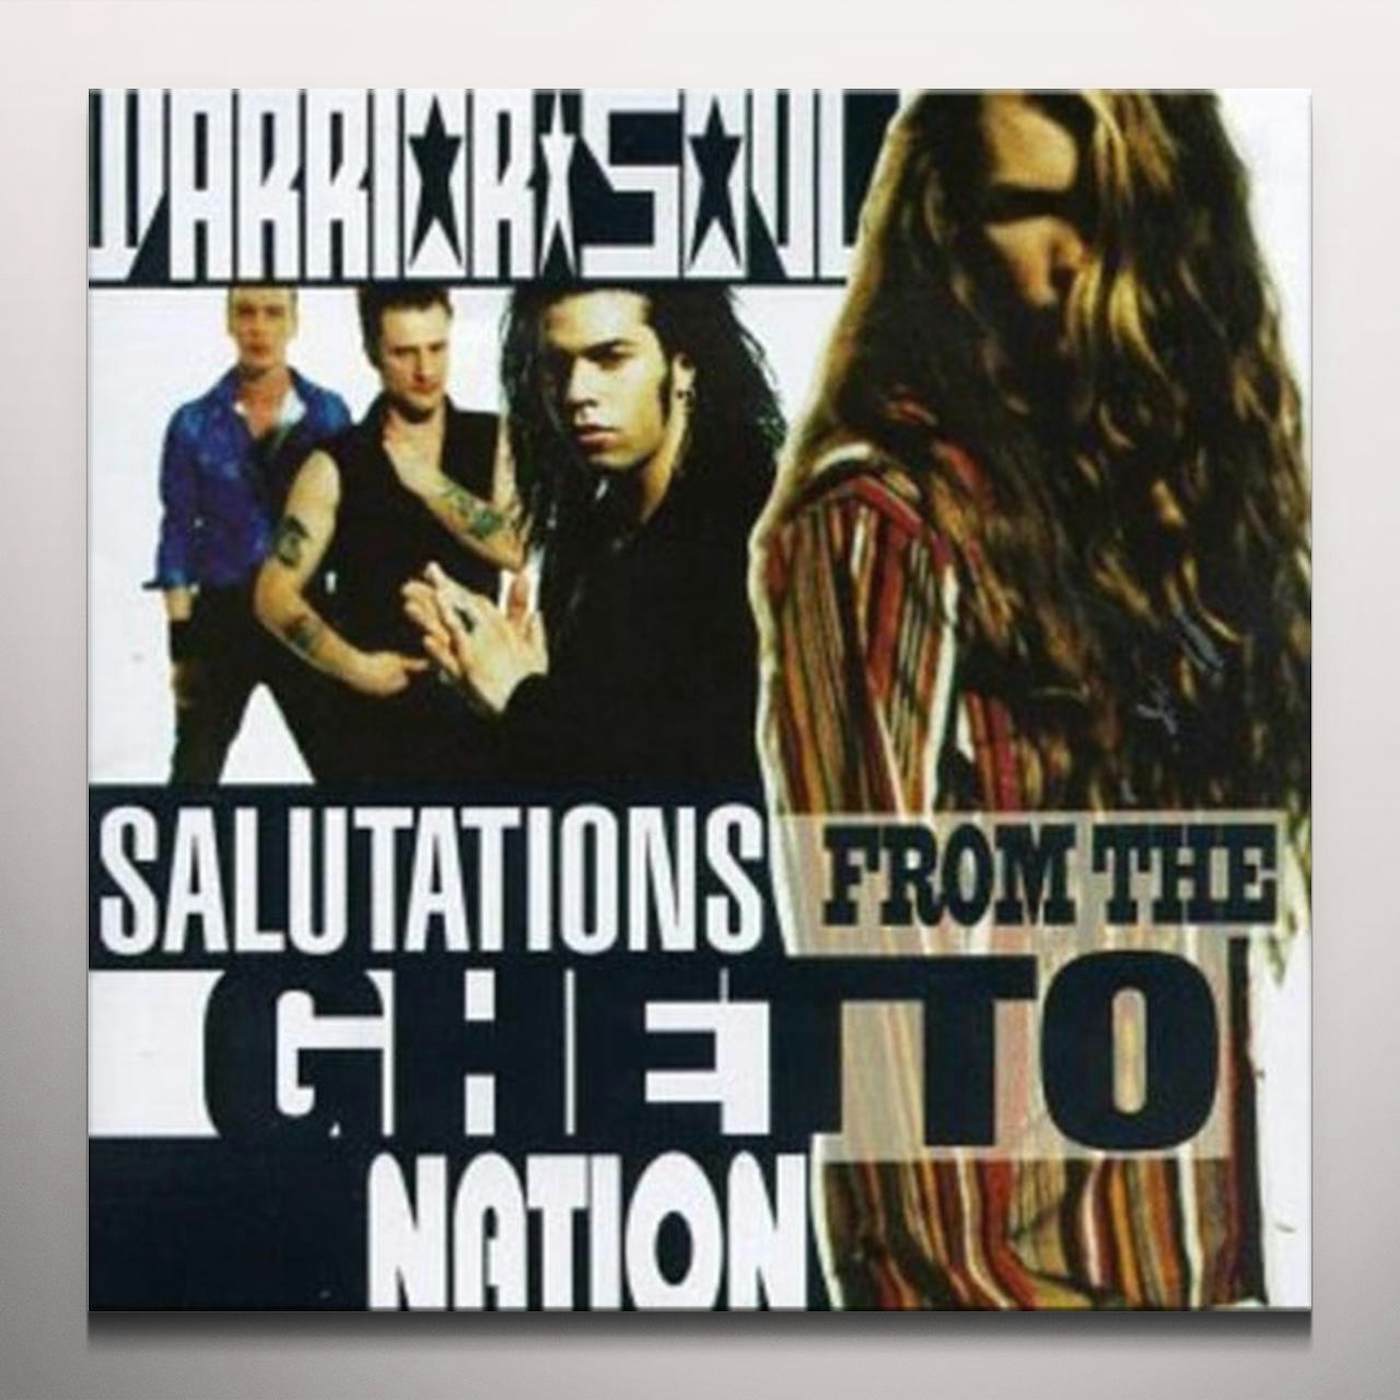 Warrior Soul Salutations From The Ghetto Nation Vinyl Record